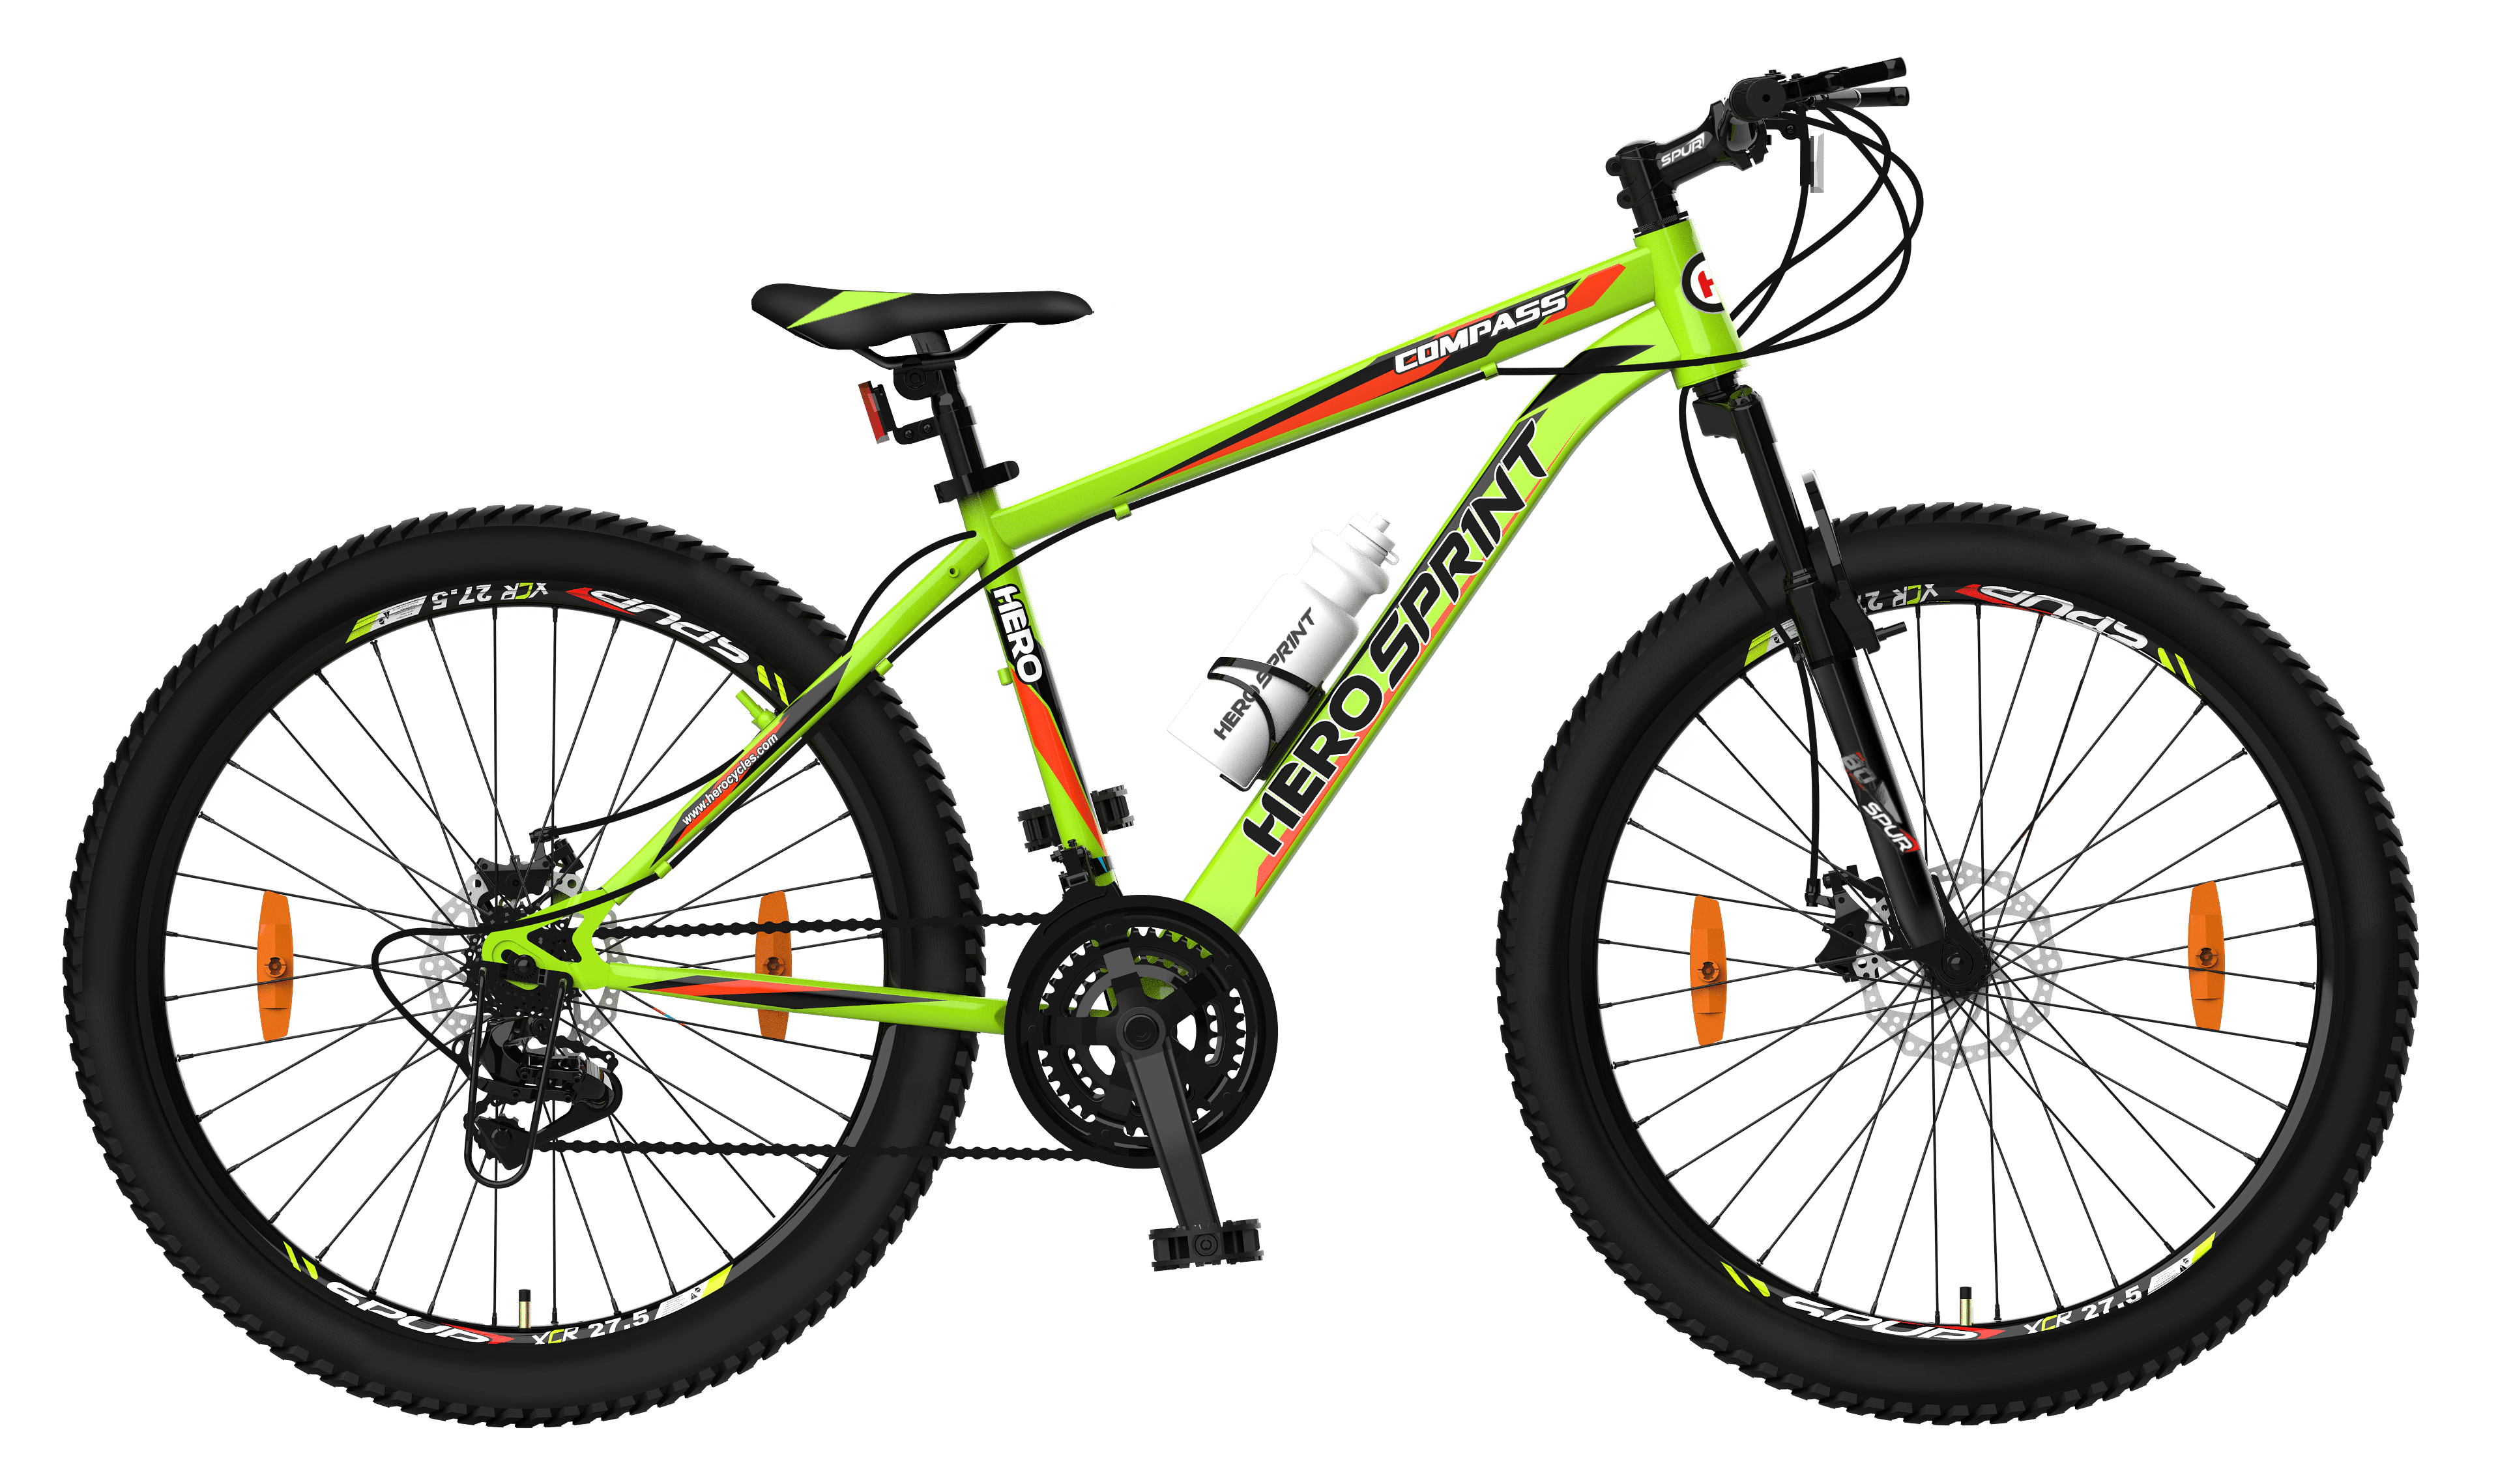 Hero Compass 27.5T (21SPD) cycle